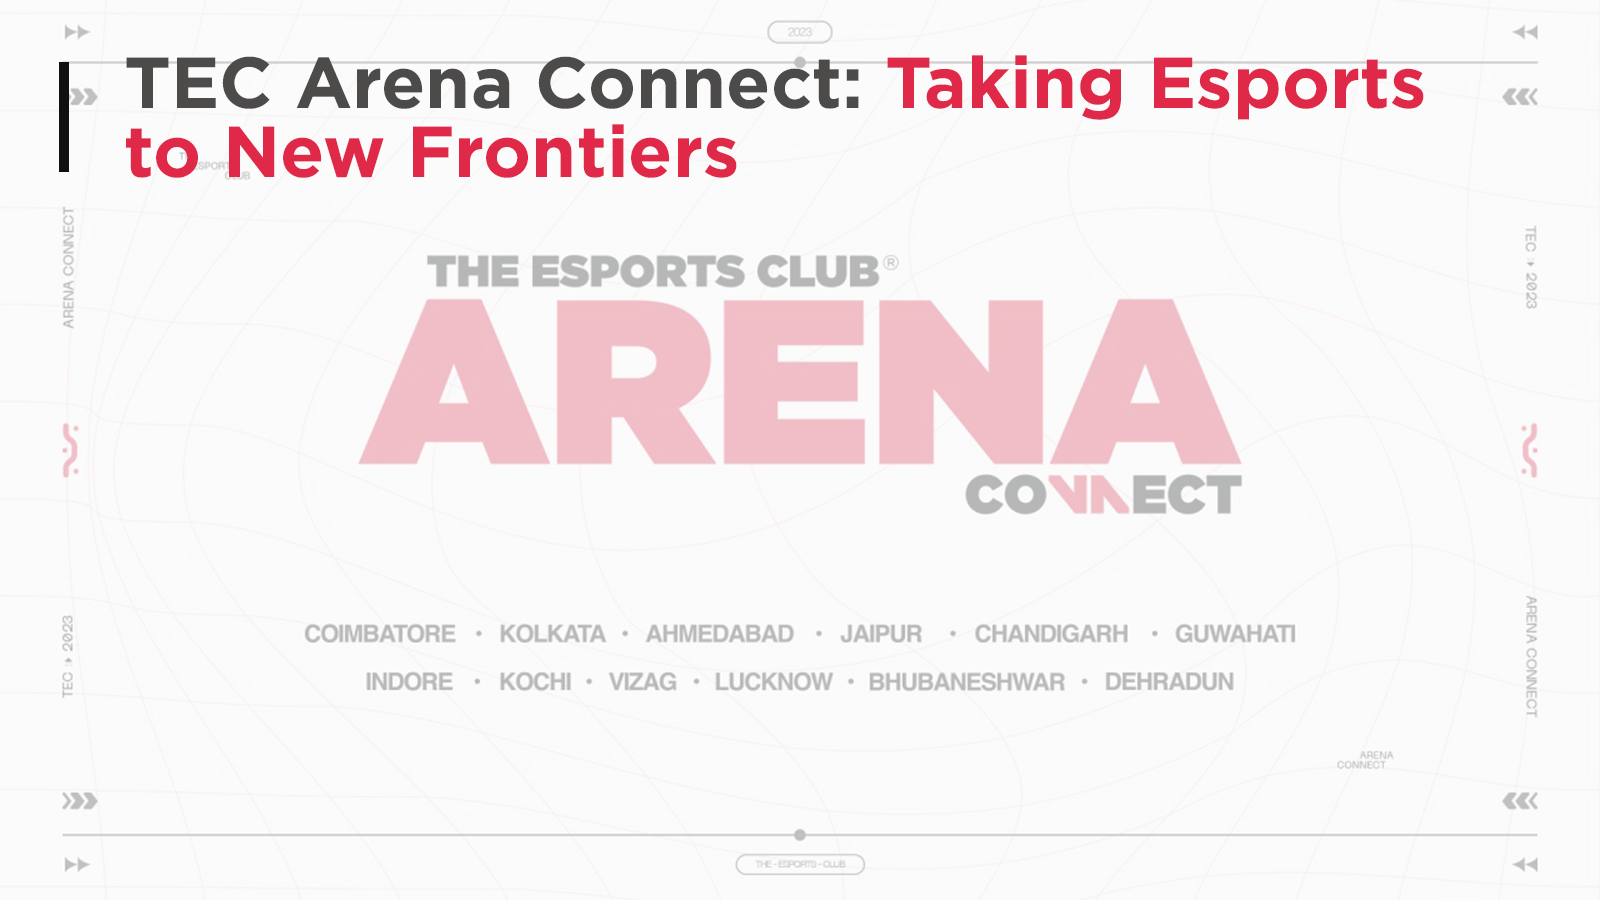 The Esports Club to Conduct TEC Arena Connect Across Tier-2 Cities in India 